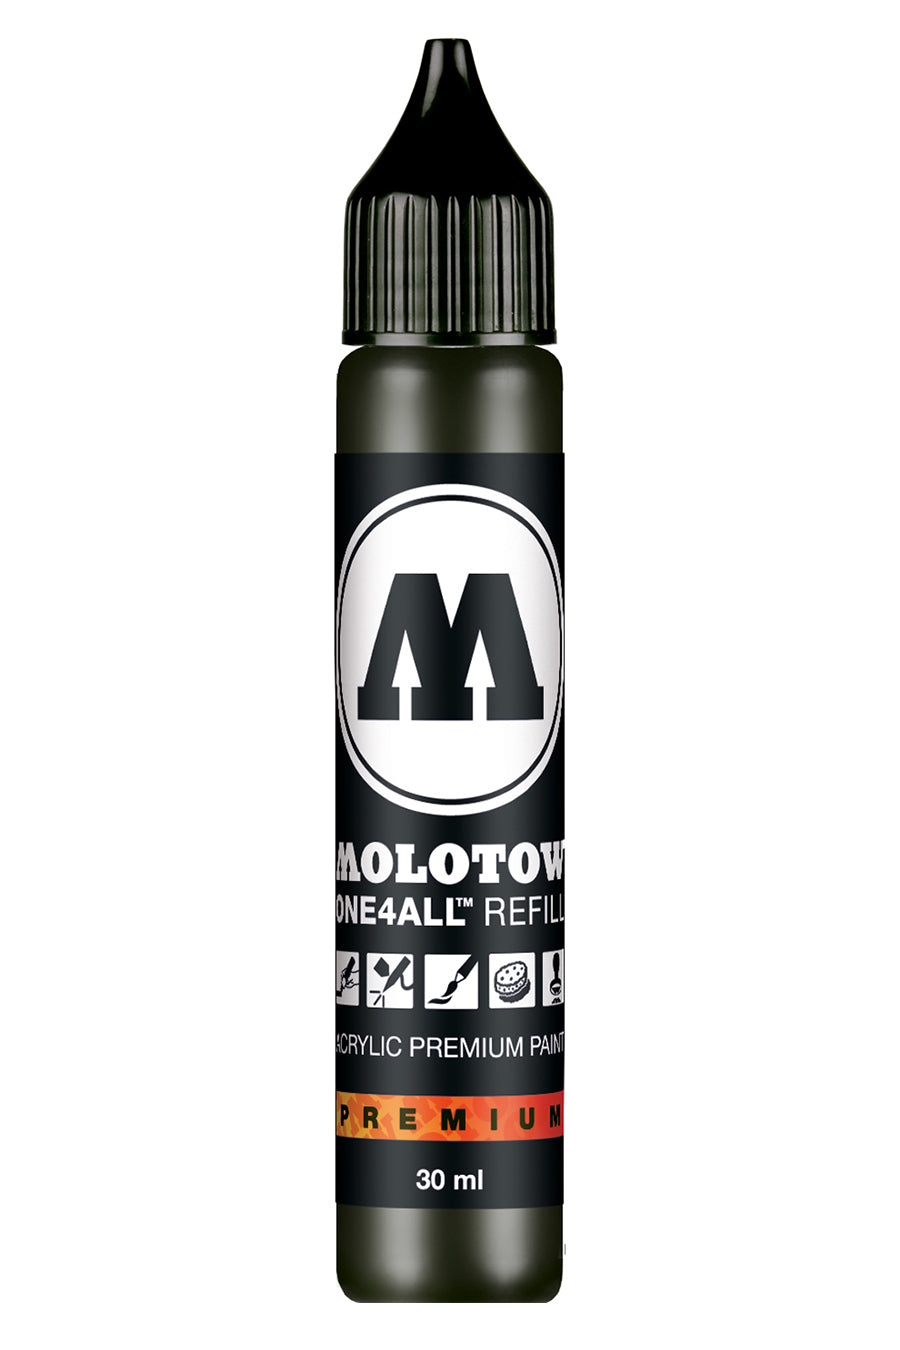 Molotow® ONE4ALL™ Refills Black Color Family